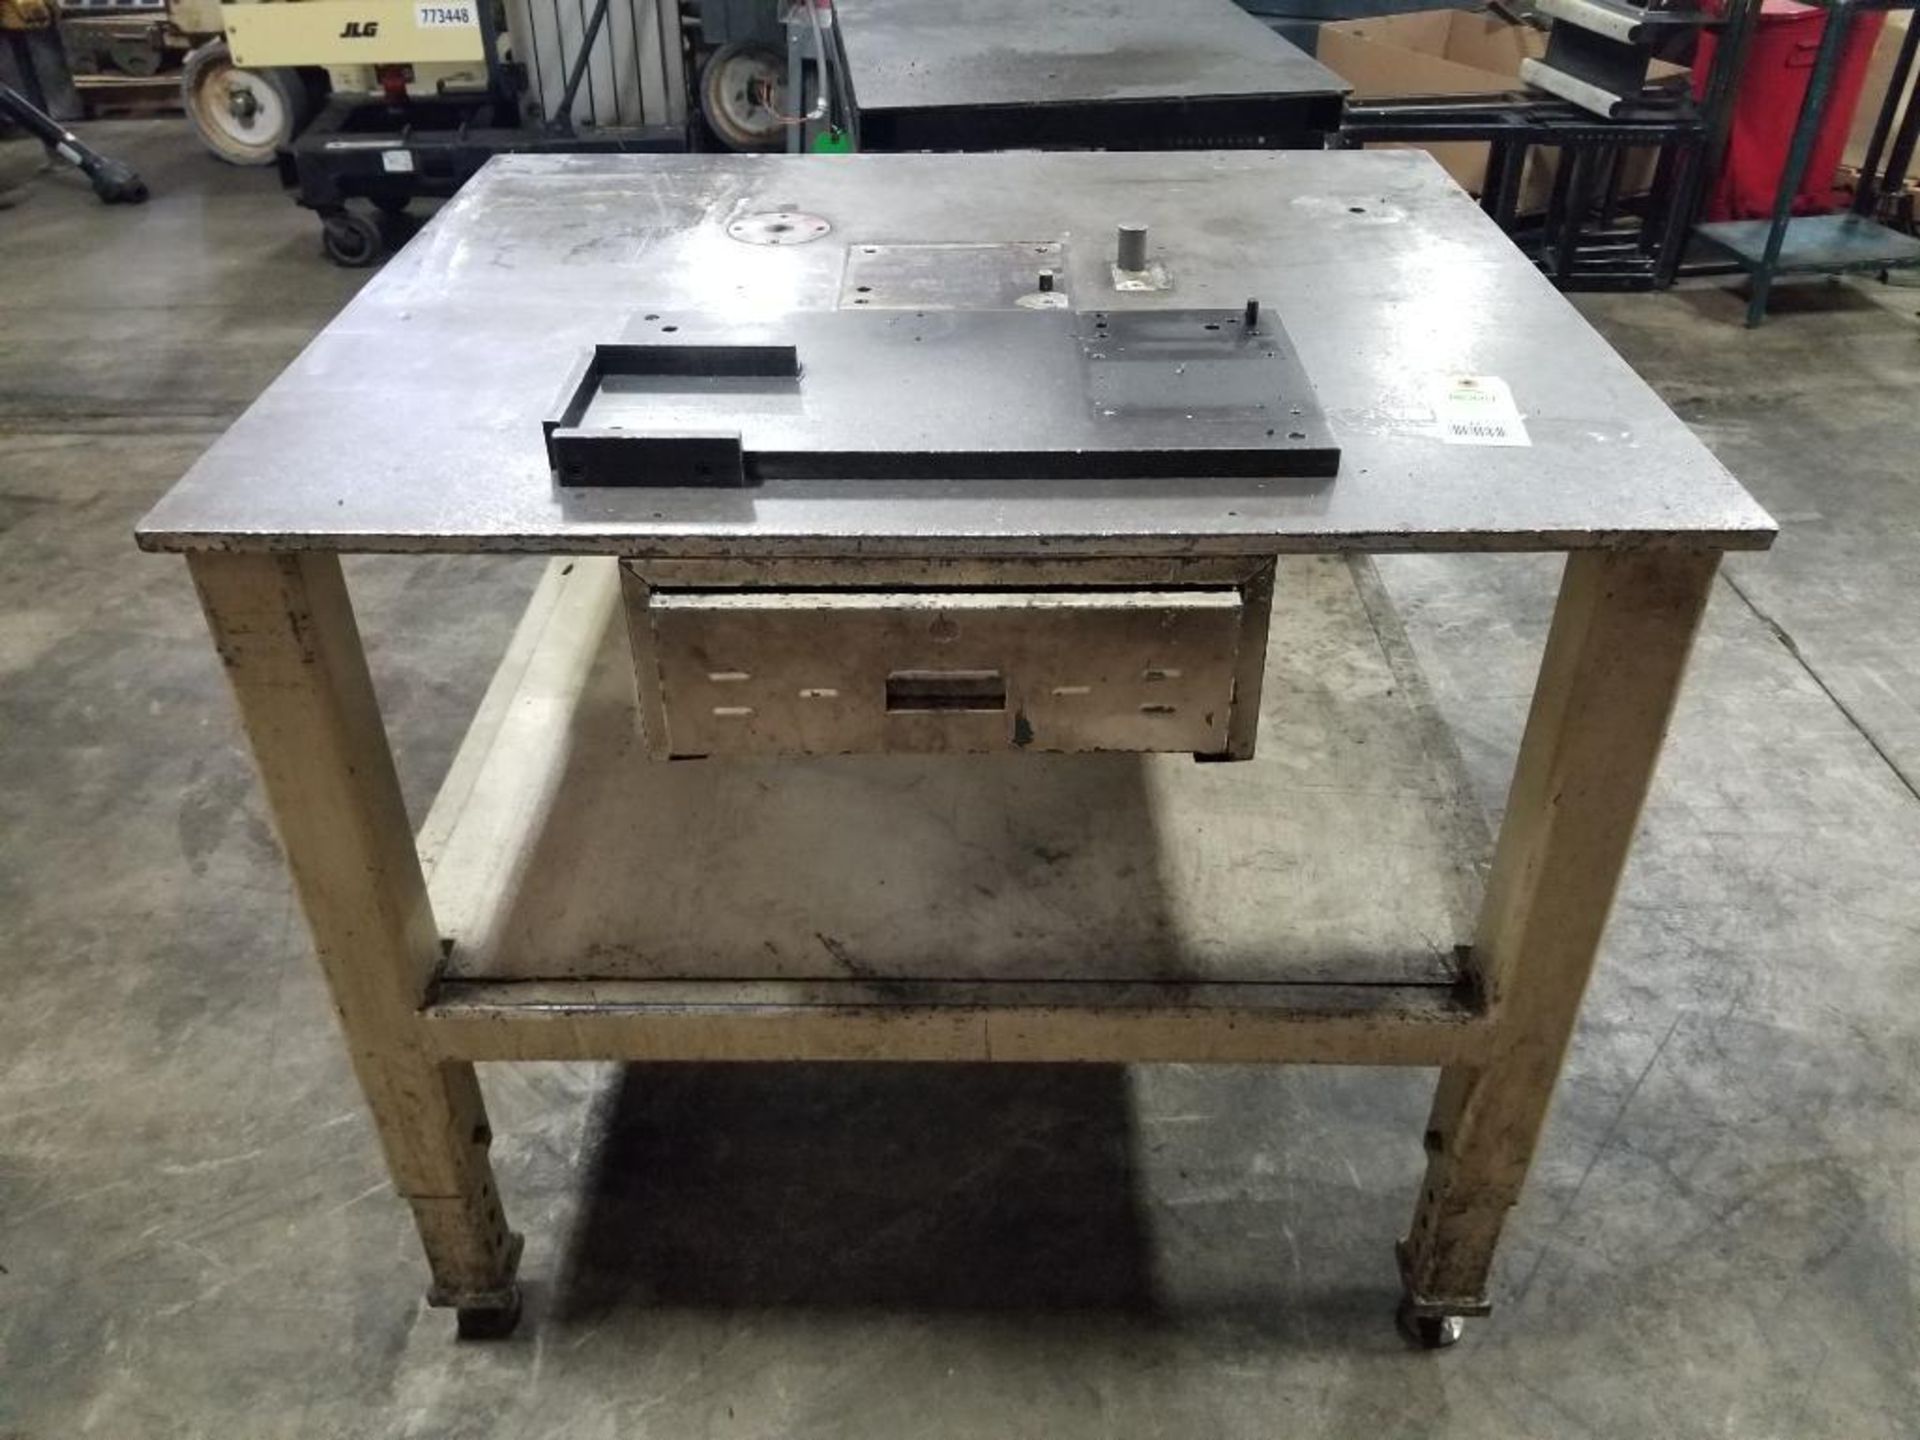 Qty 2 - Industrial work tables. 42x37x38, 43x27x37. LxWxH. - Image 2 of 8